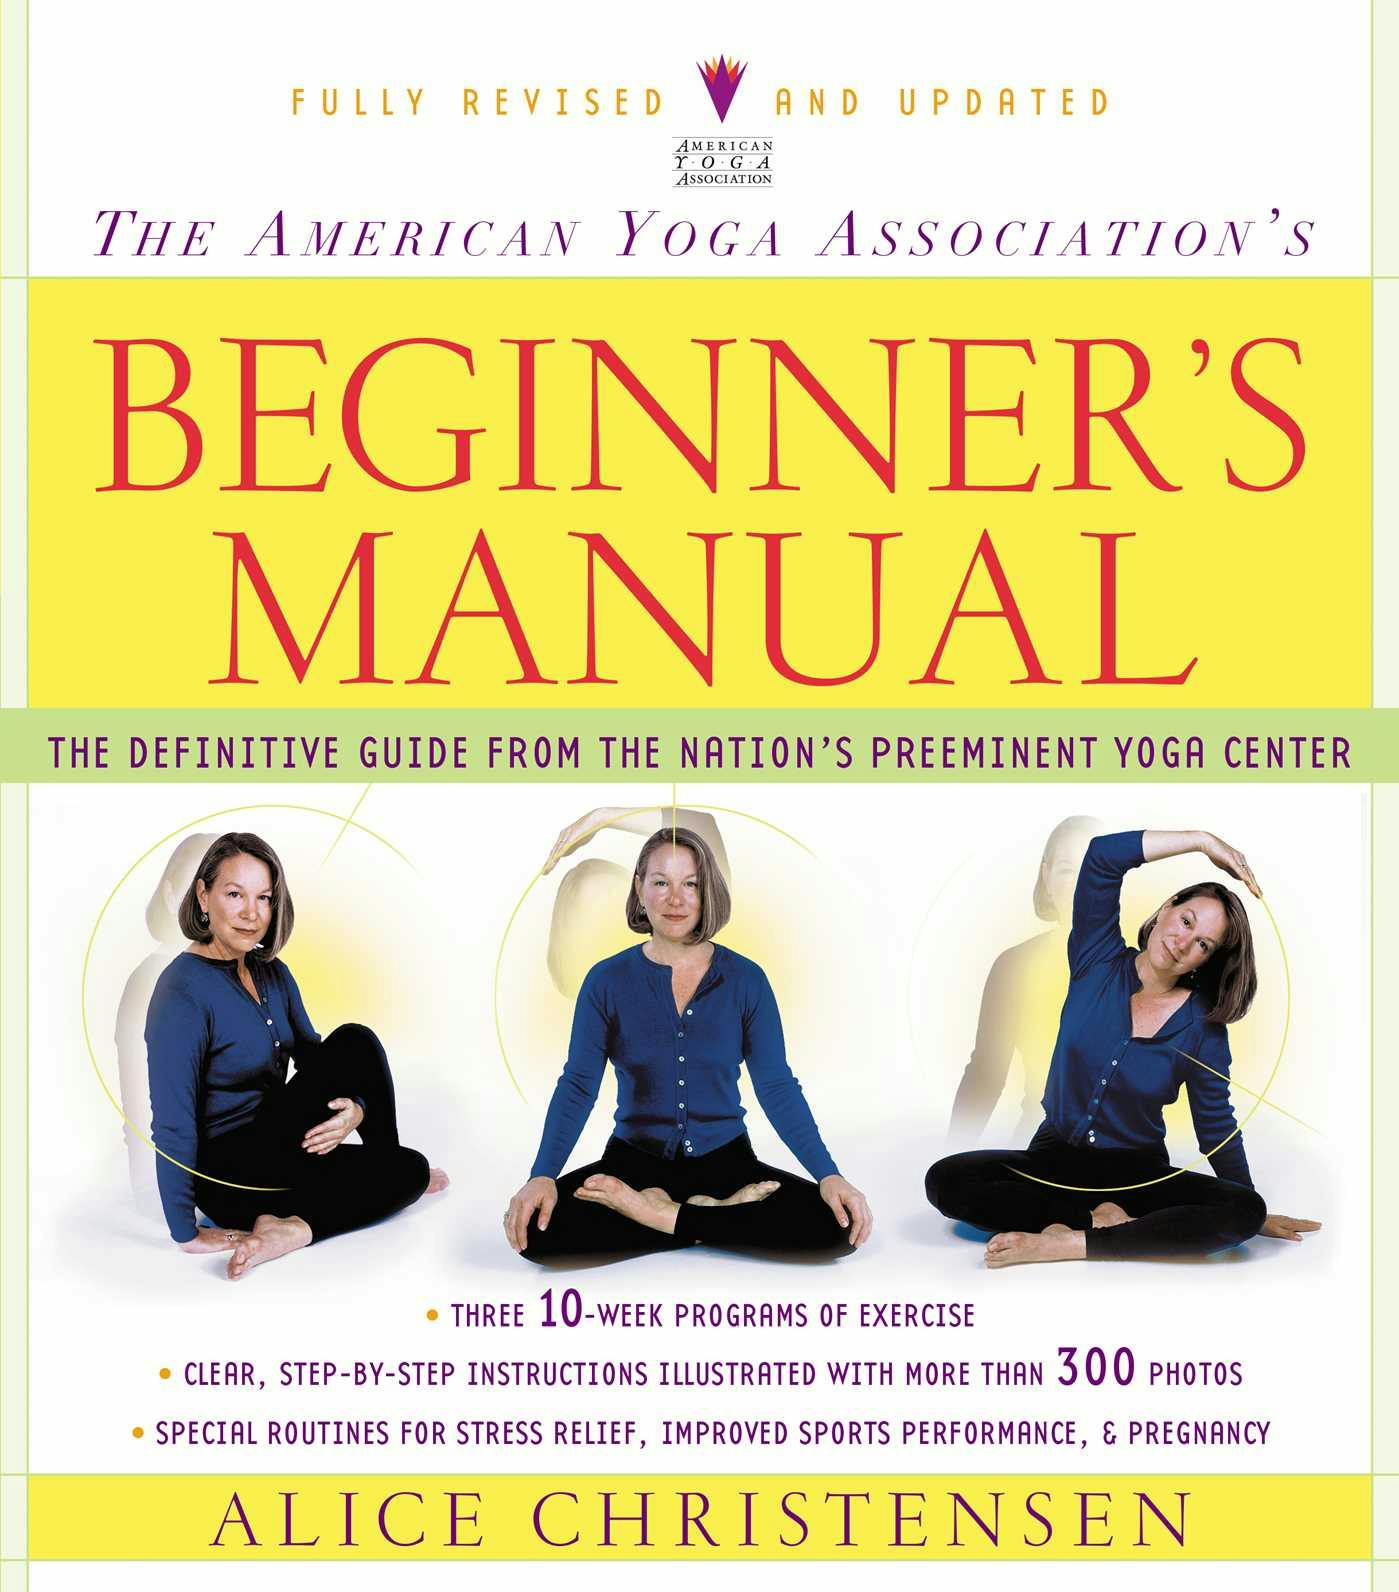 The American Yoga Association Beginner's Manual Fully Revised and Updated - Alice Christensen